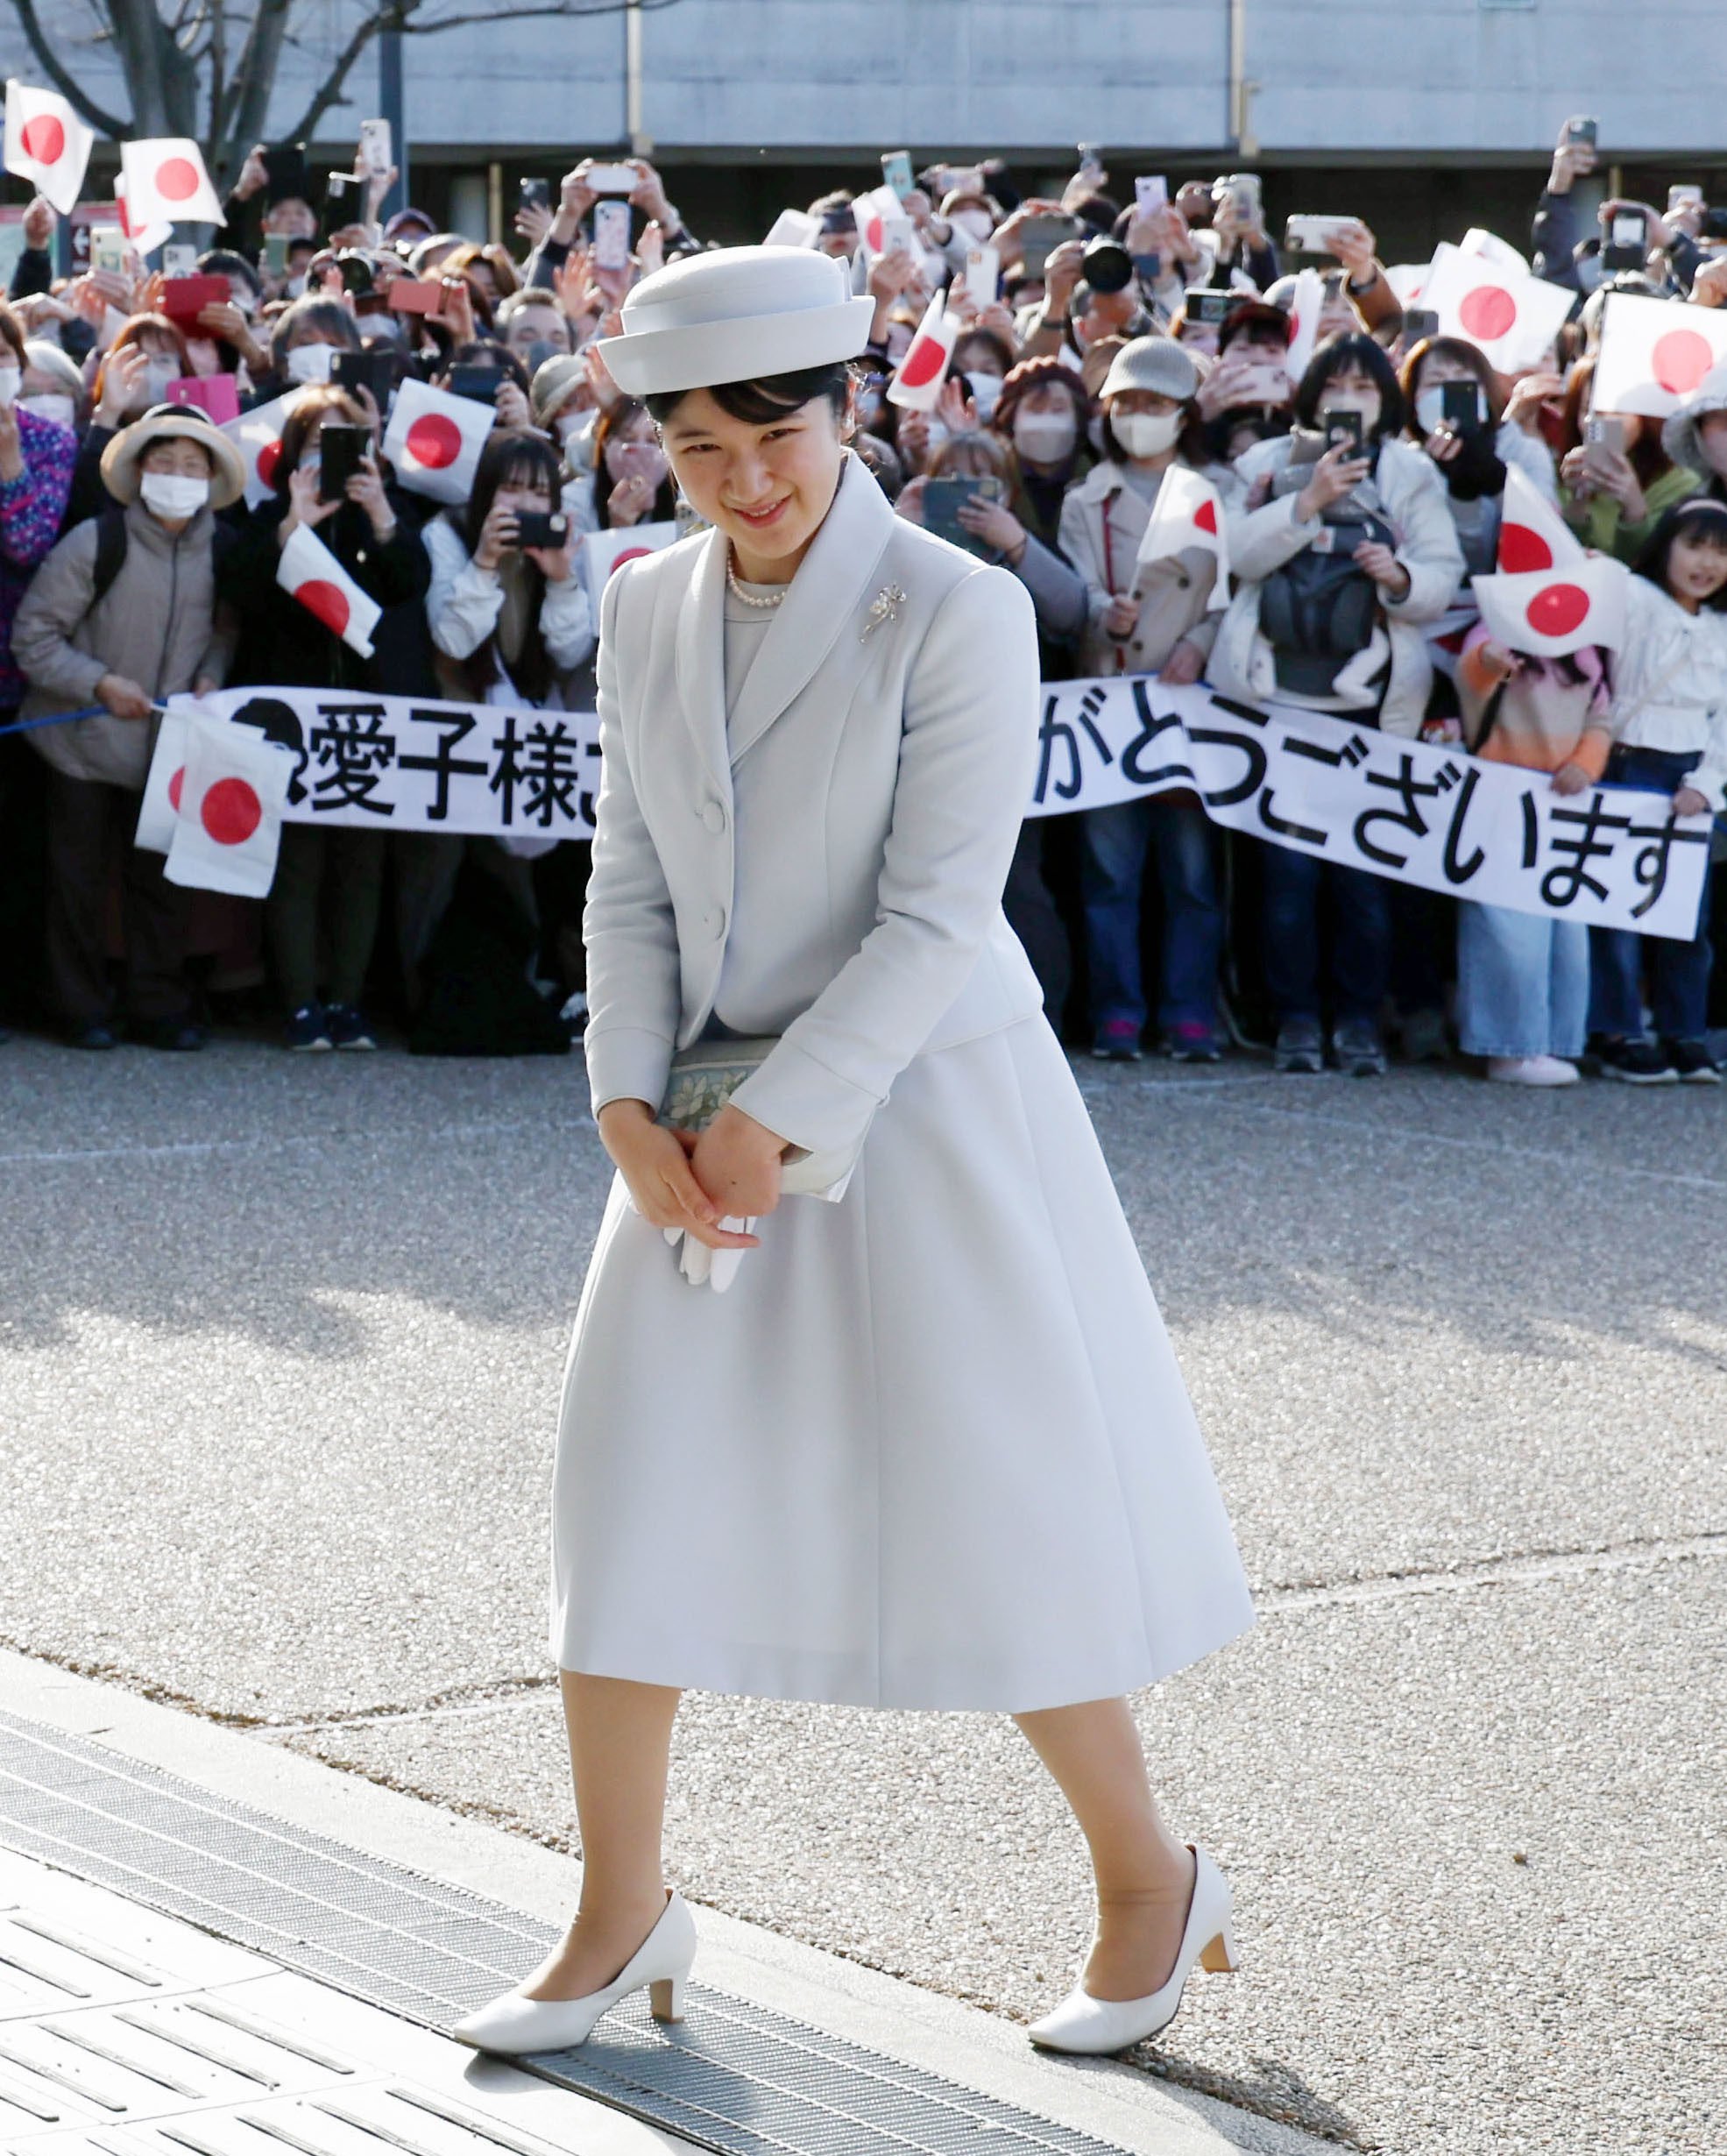 Japanese Princess Aiko arrives in Kashihara, Nara prefecture, on March 27, to visit the mausoleum of emperor Jimmu. Photo: Kyodo